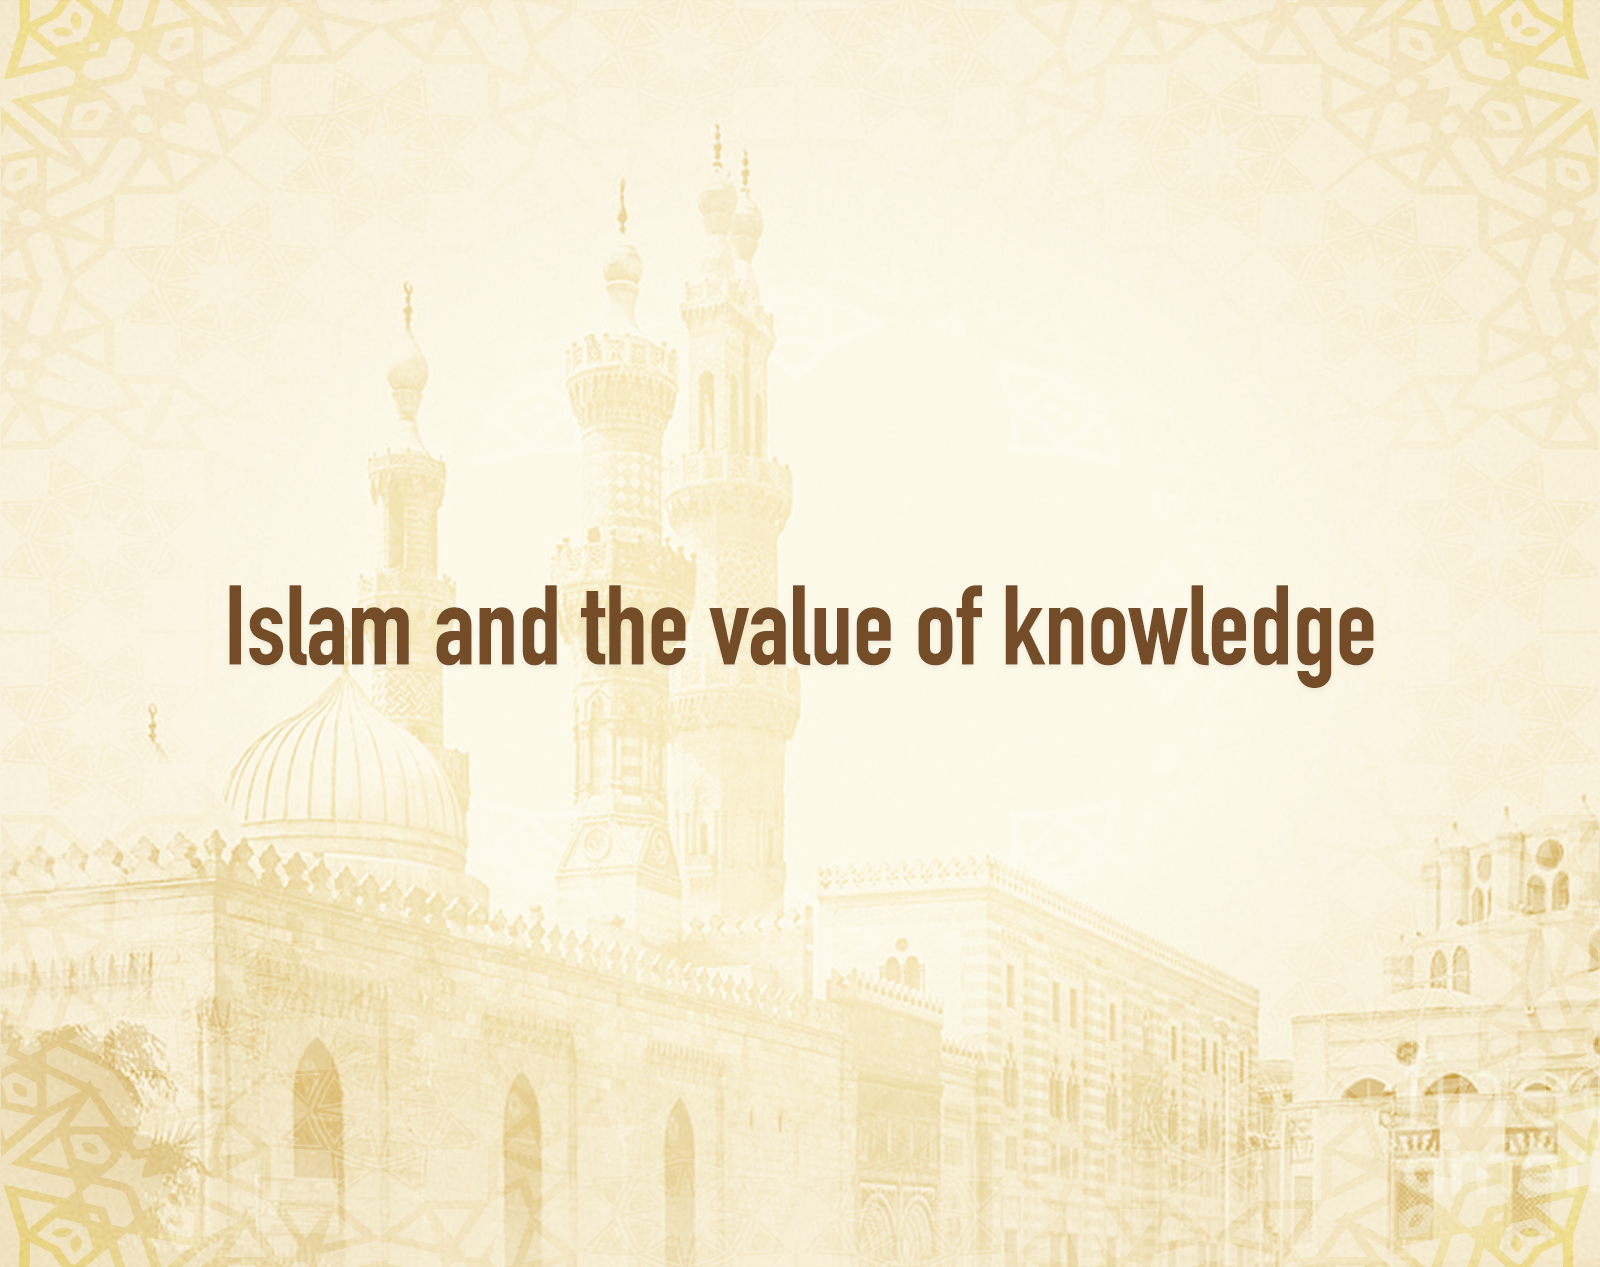 Islam and the value of knowledge.png